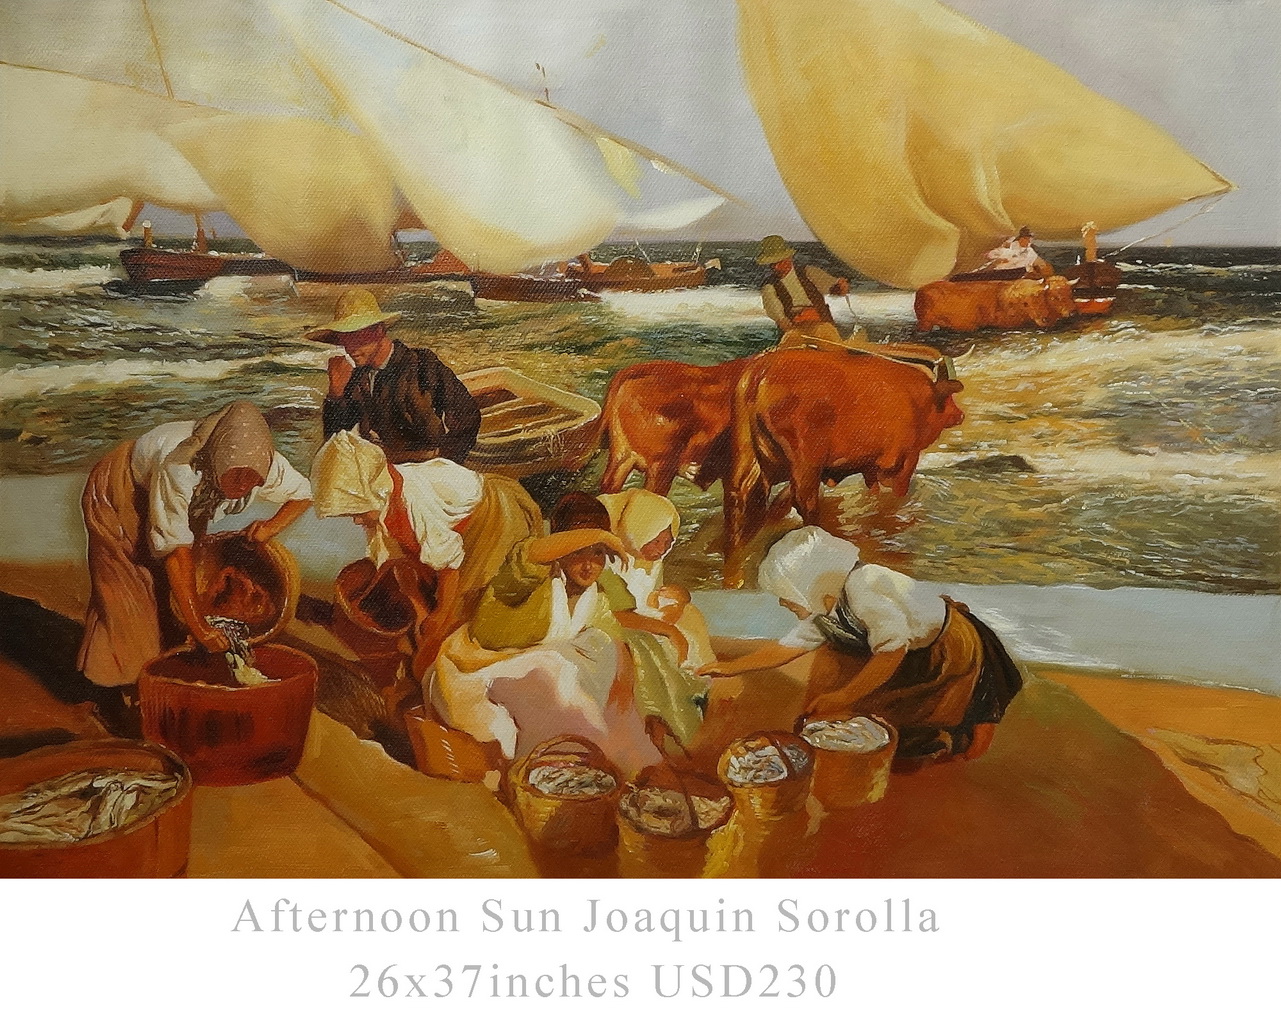 Afternoon Sun Joaquin Sorolla 26x37inches USD115 Oil Paintings